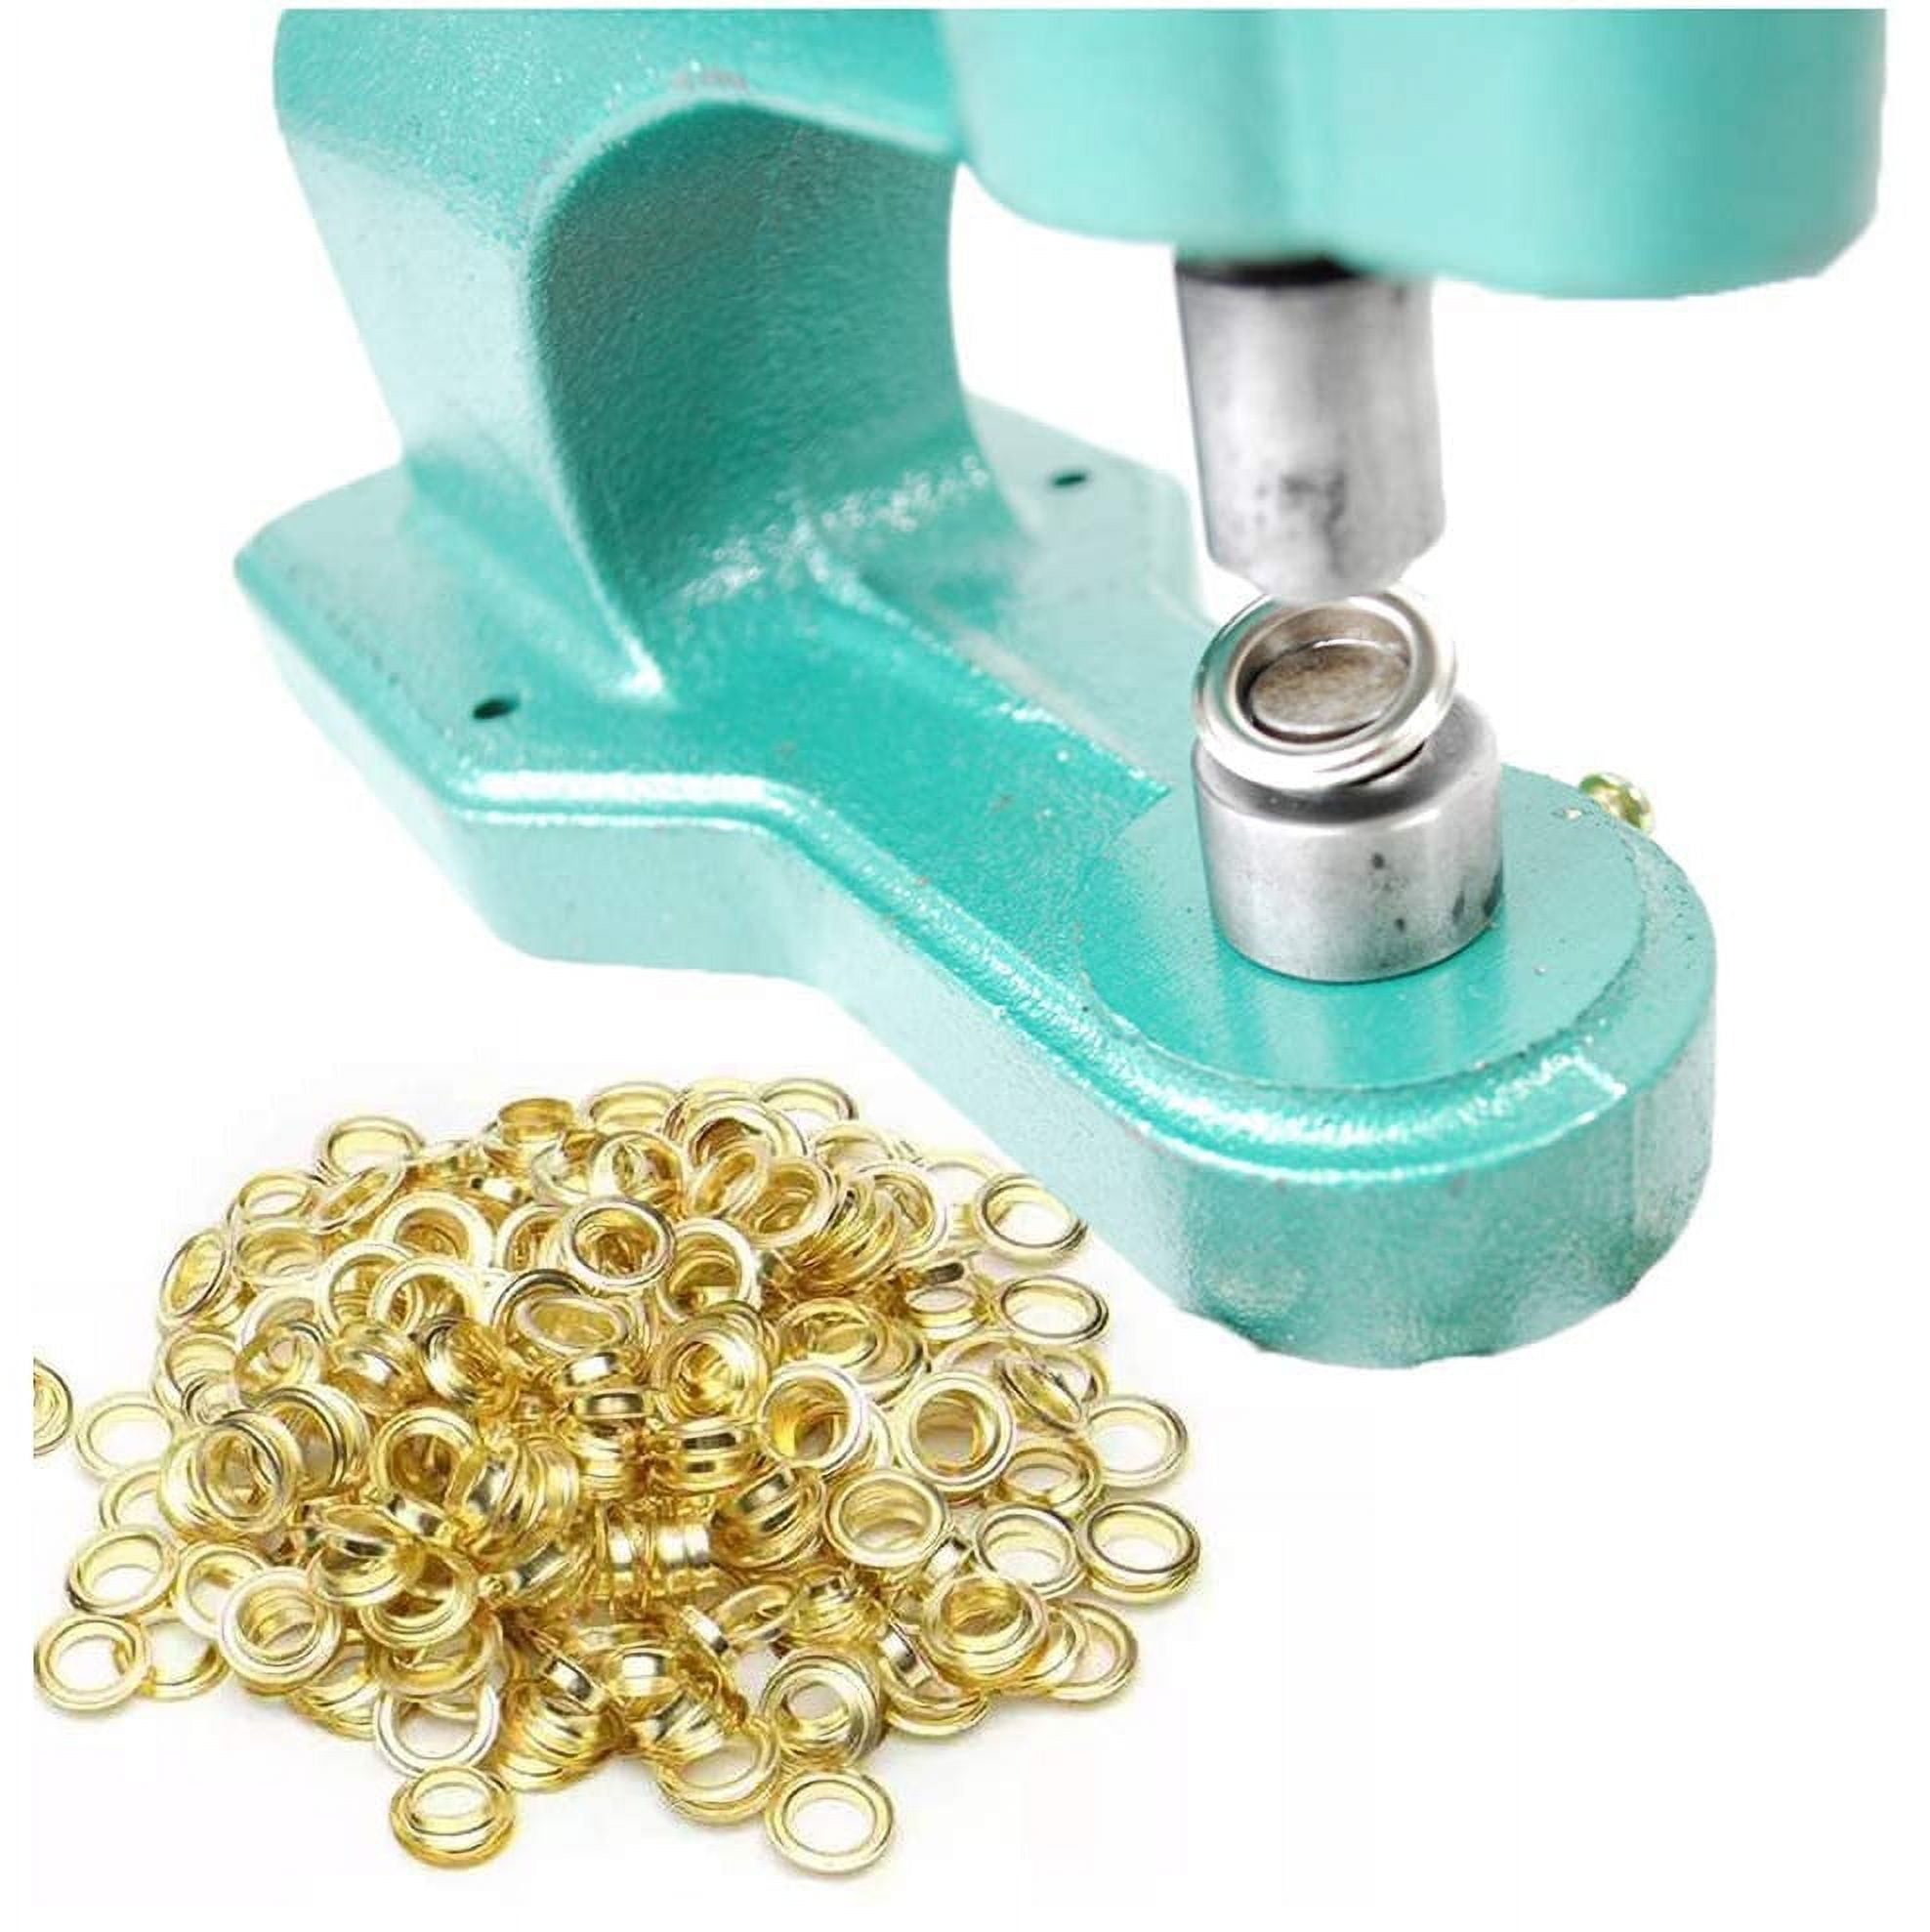 Hobby Trendy Complete Kit of 600 Eyelets (#3#5#24) with Hand Press Grommet Machine, Dies and Hole Punch Red Press / Gold